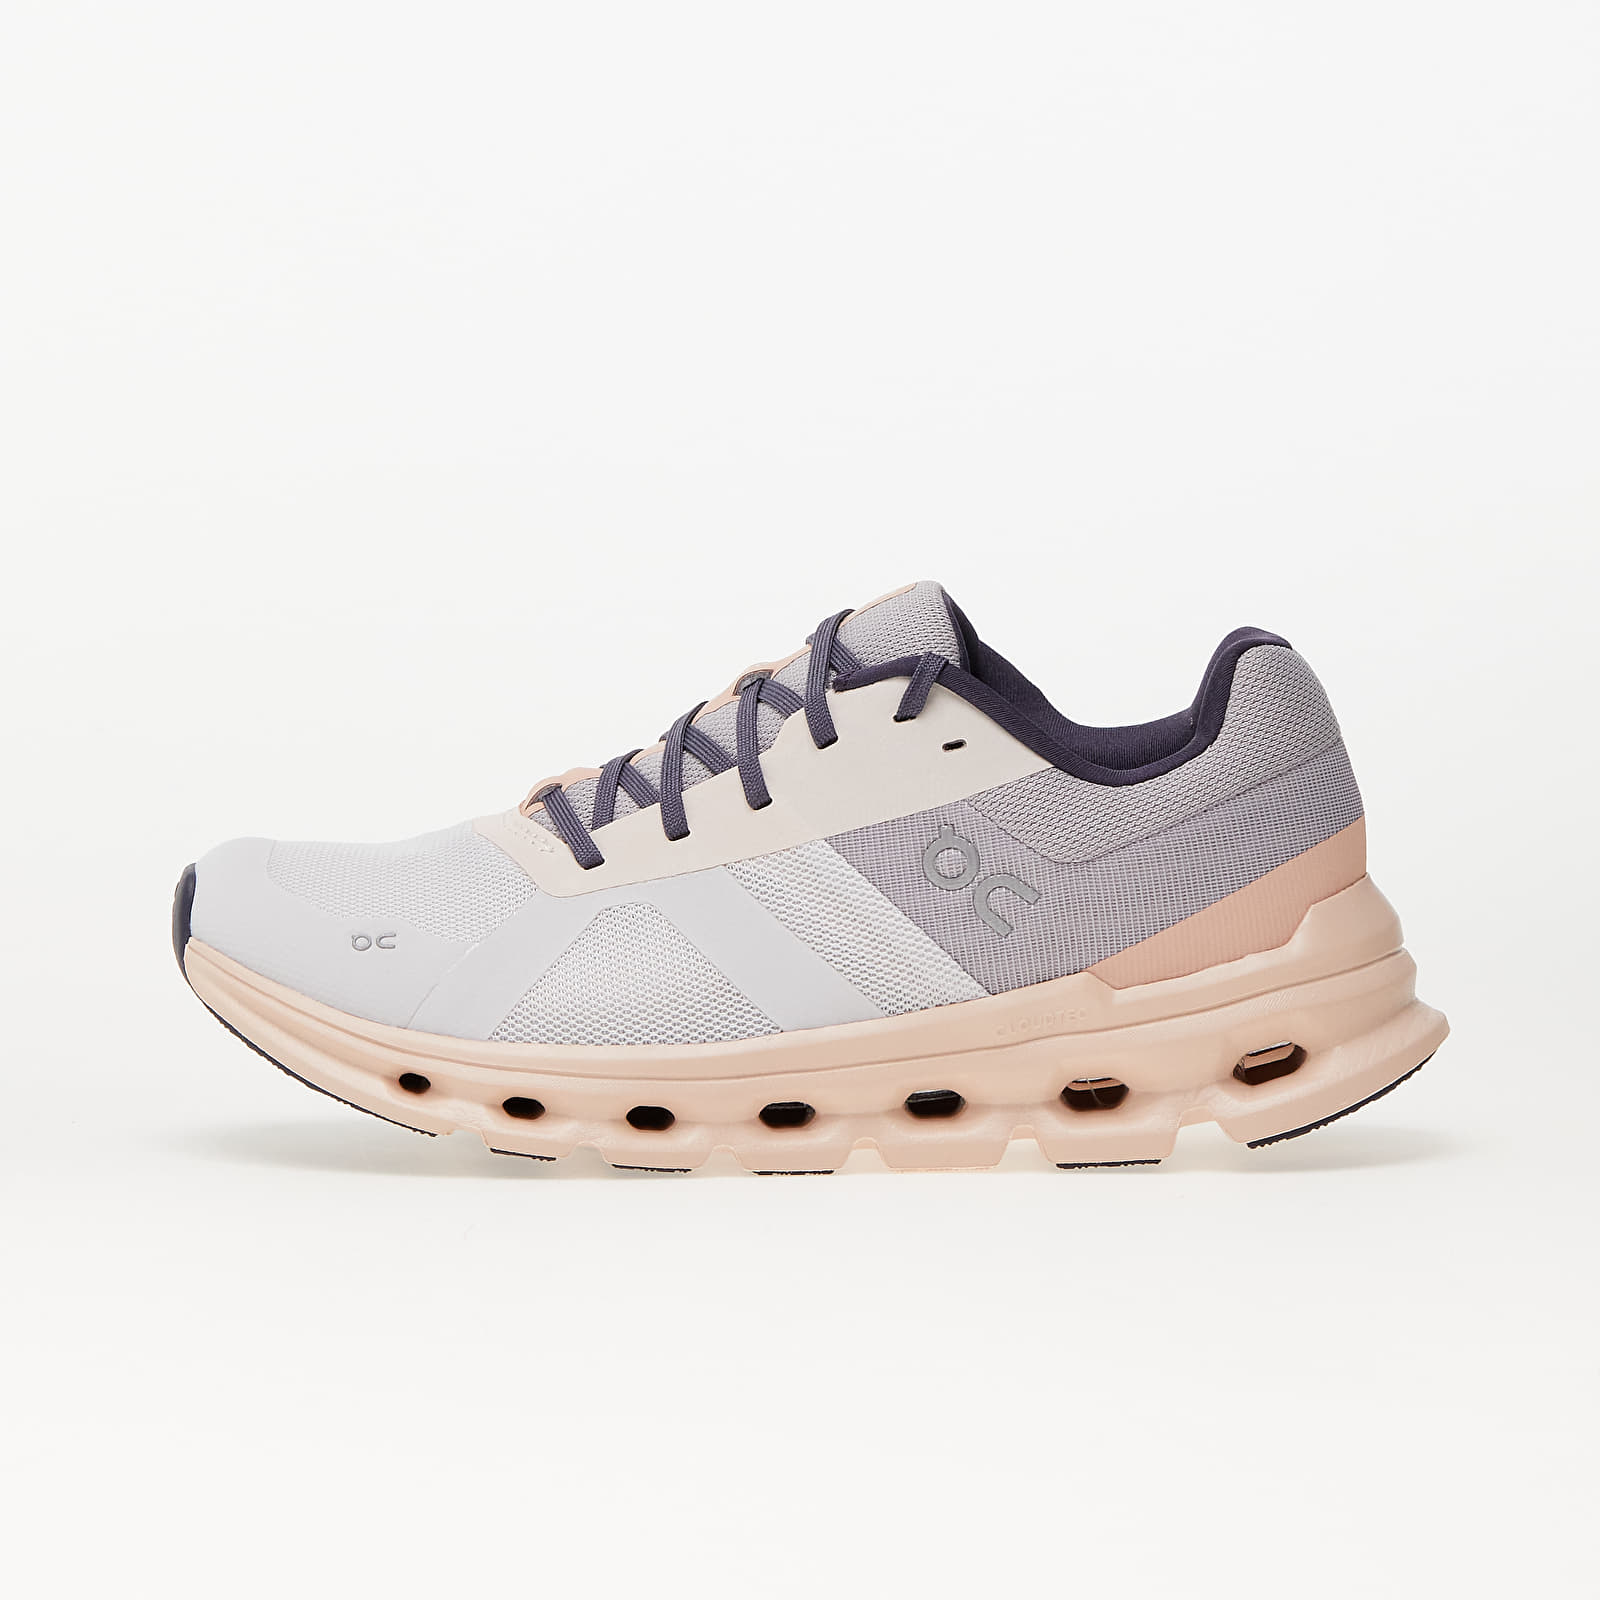 Women's shoes On W Cloudrunner Frost/ Fade